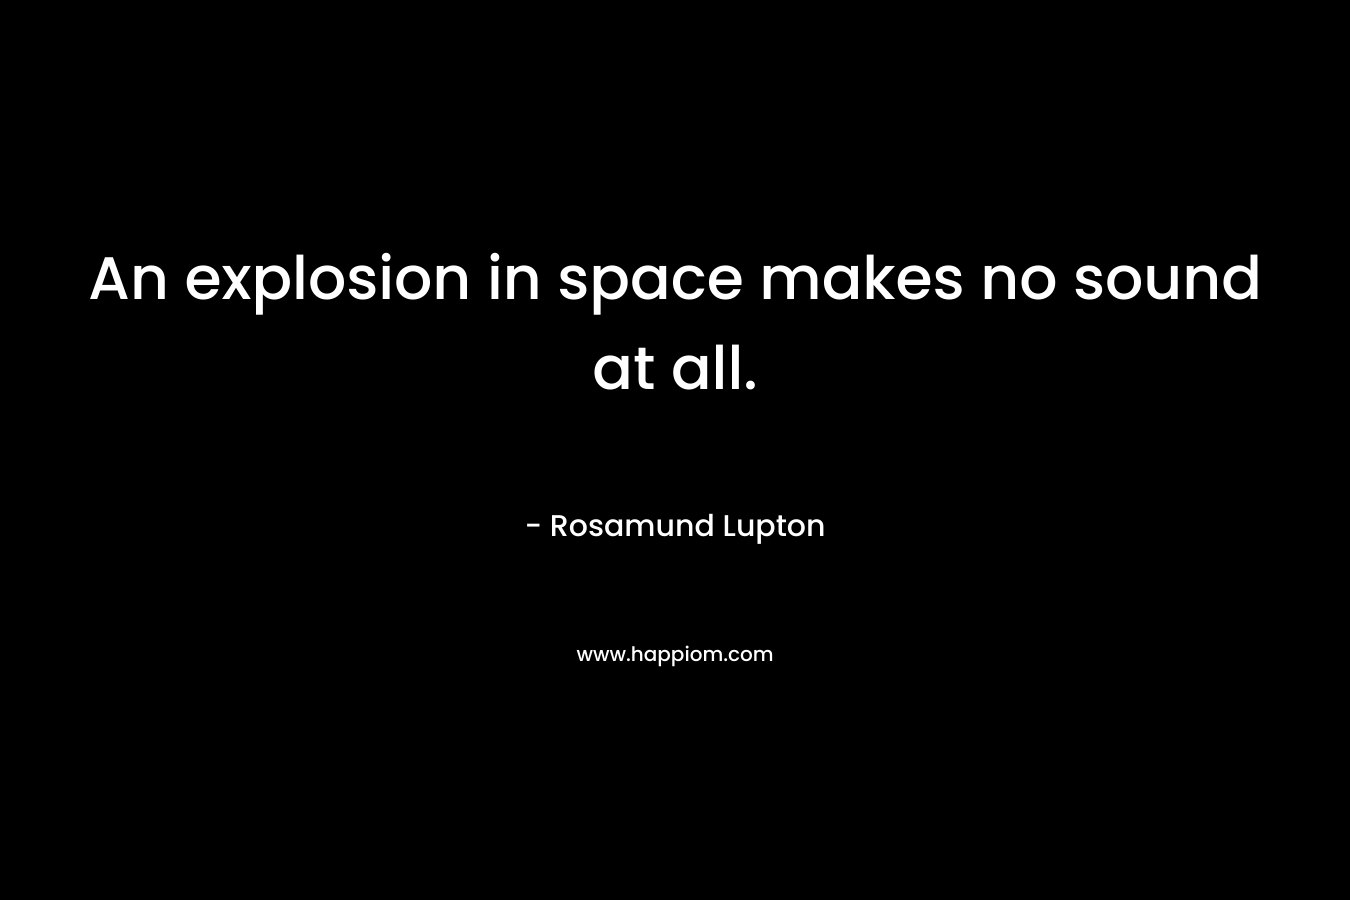 An explosion in space makes no sound at all.